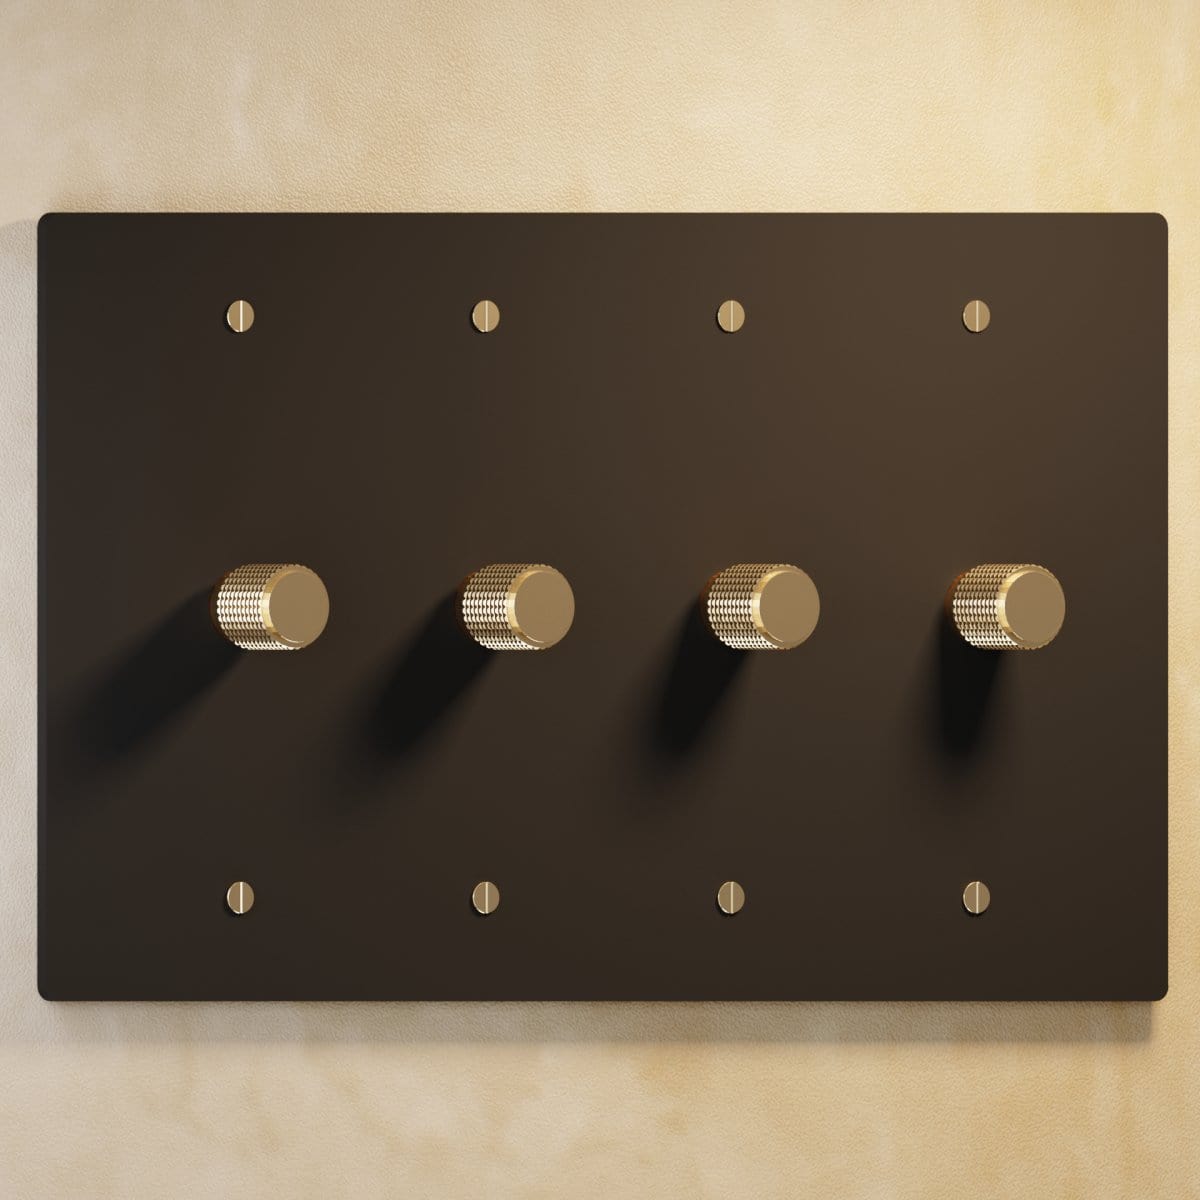 Residence Supply Night Black with Brass Brass Rotary Dimmer Switch (4-Gang)